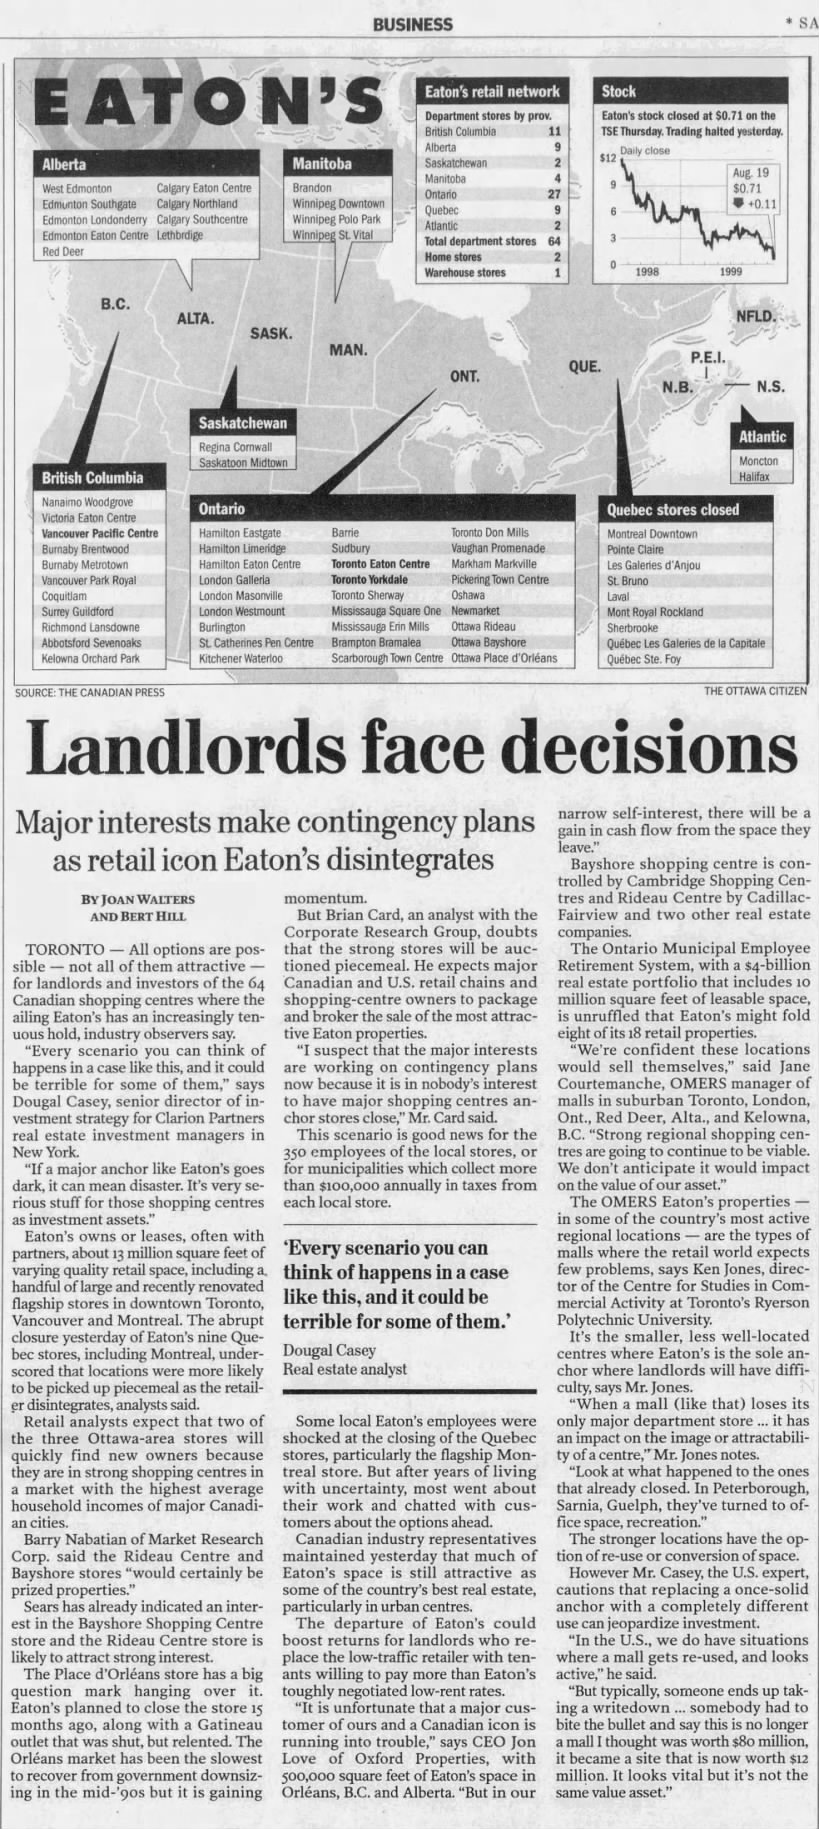 Landlord face decisions
